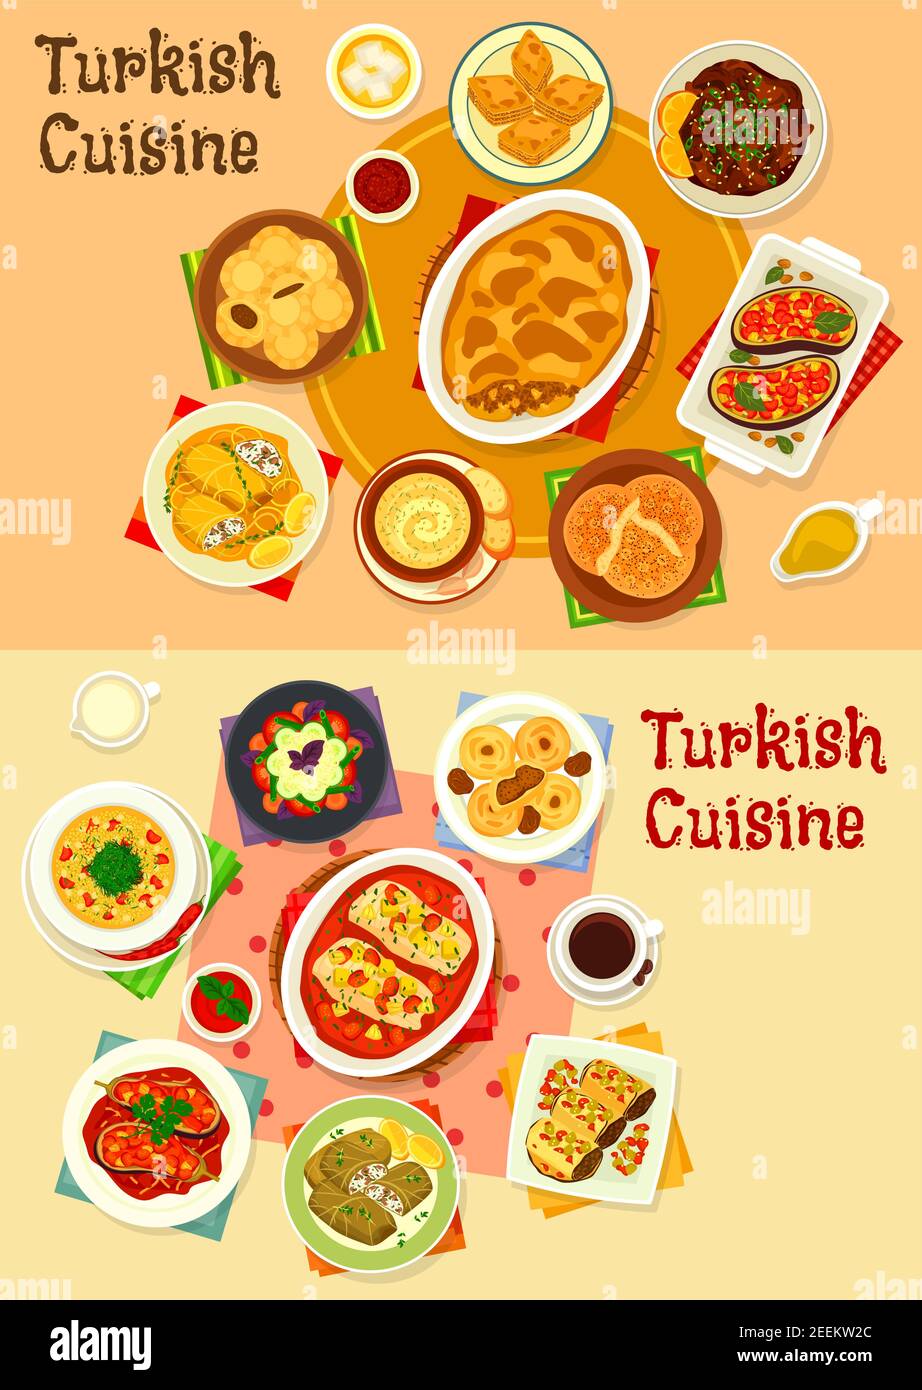 Turkish cuisine dinner icon set. Baked meat and fish with tomato and fruit sauce, vegetable stew and salad, cabbage roll, stuffed eggplant with meat a Stock Vector